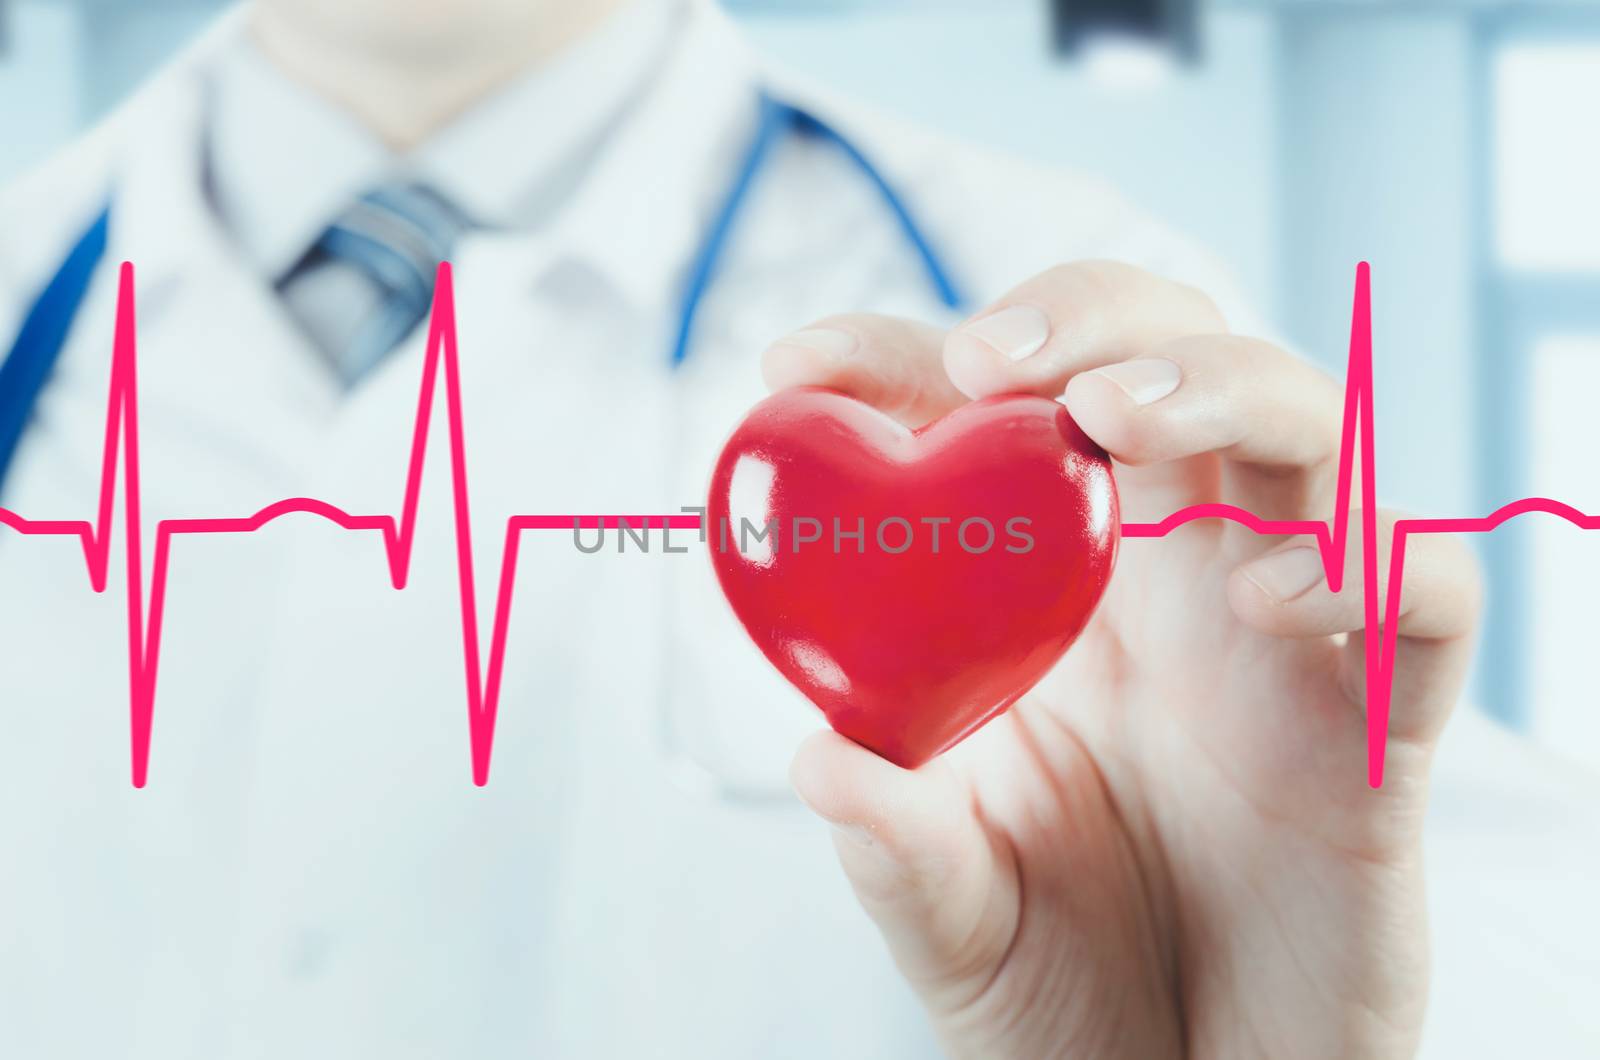 Cardiologist holding heart 3D model. Abstract concept with cardiogram. heart medicine cardiogram doctor healthcare stethoscope medical 3d concept